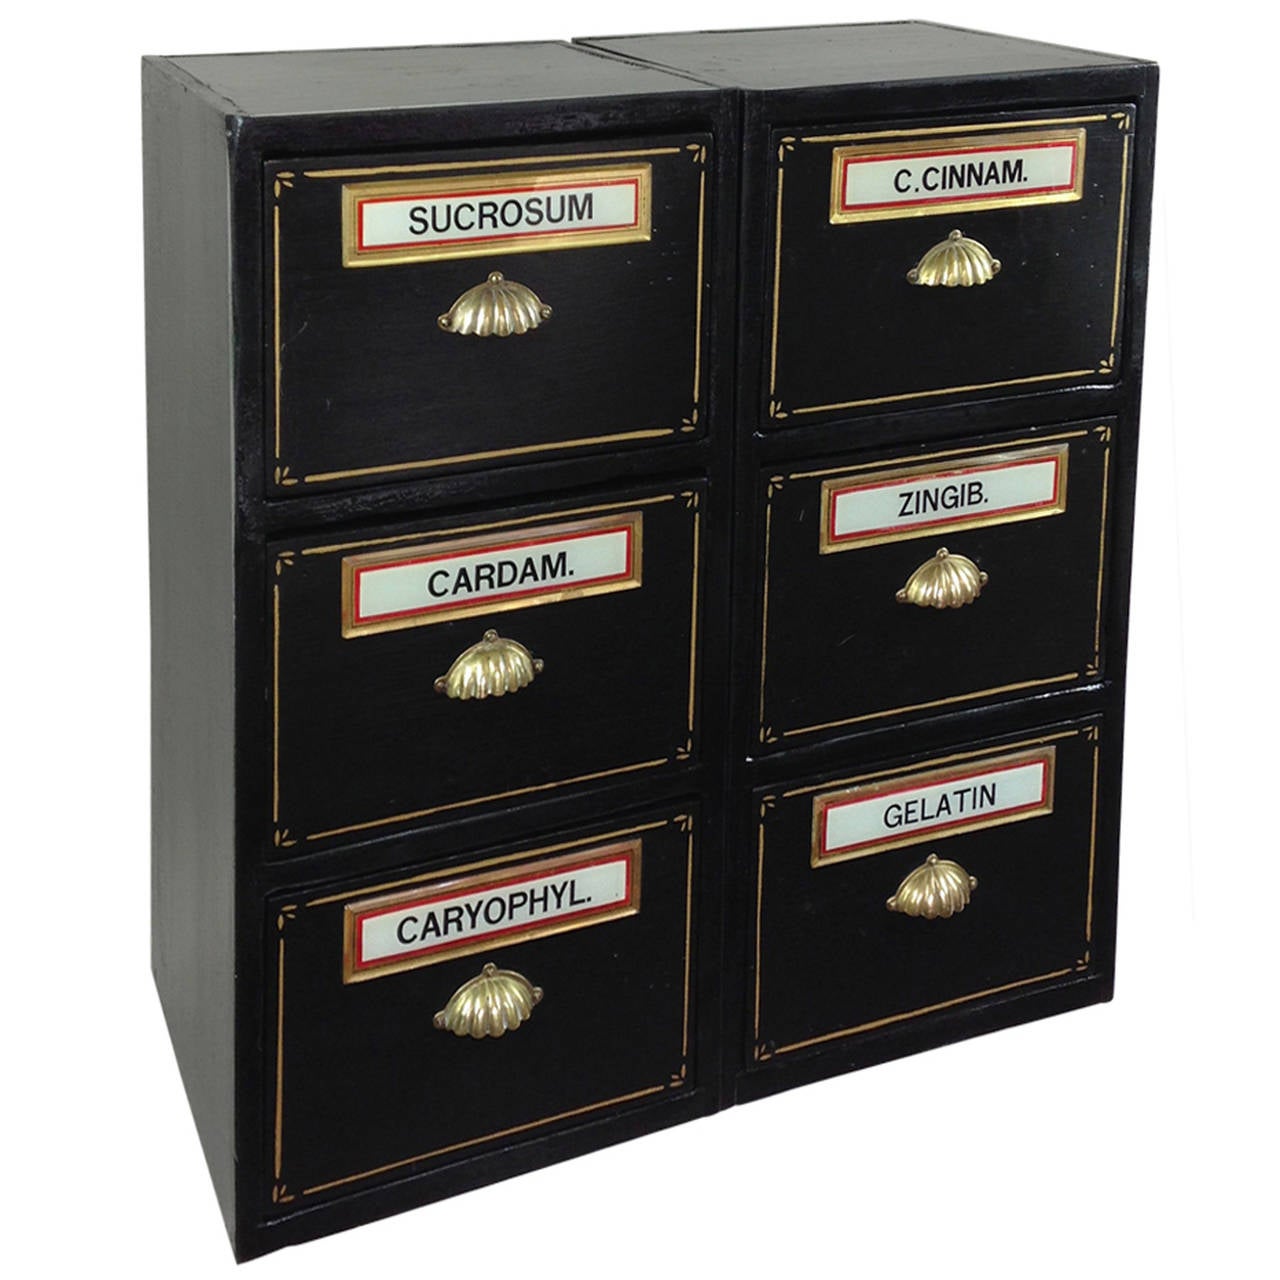 A very attractive pair of small Victorian apothecary / chemist's drawers.

Each unit contains 3 good sized drawers with later brass handles and original glass labels.

The drawers can be set in various configurations including side by side, on